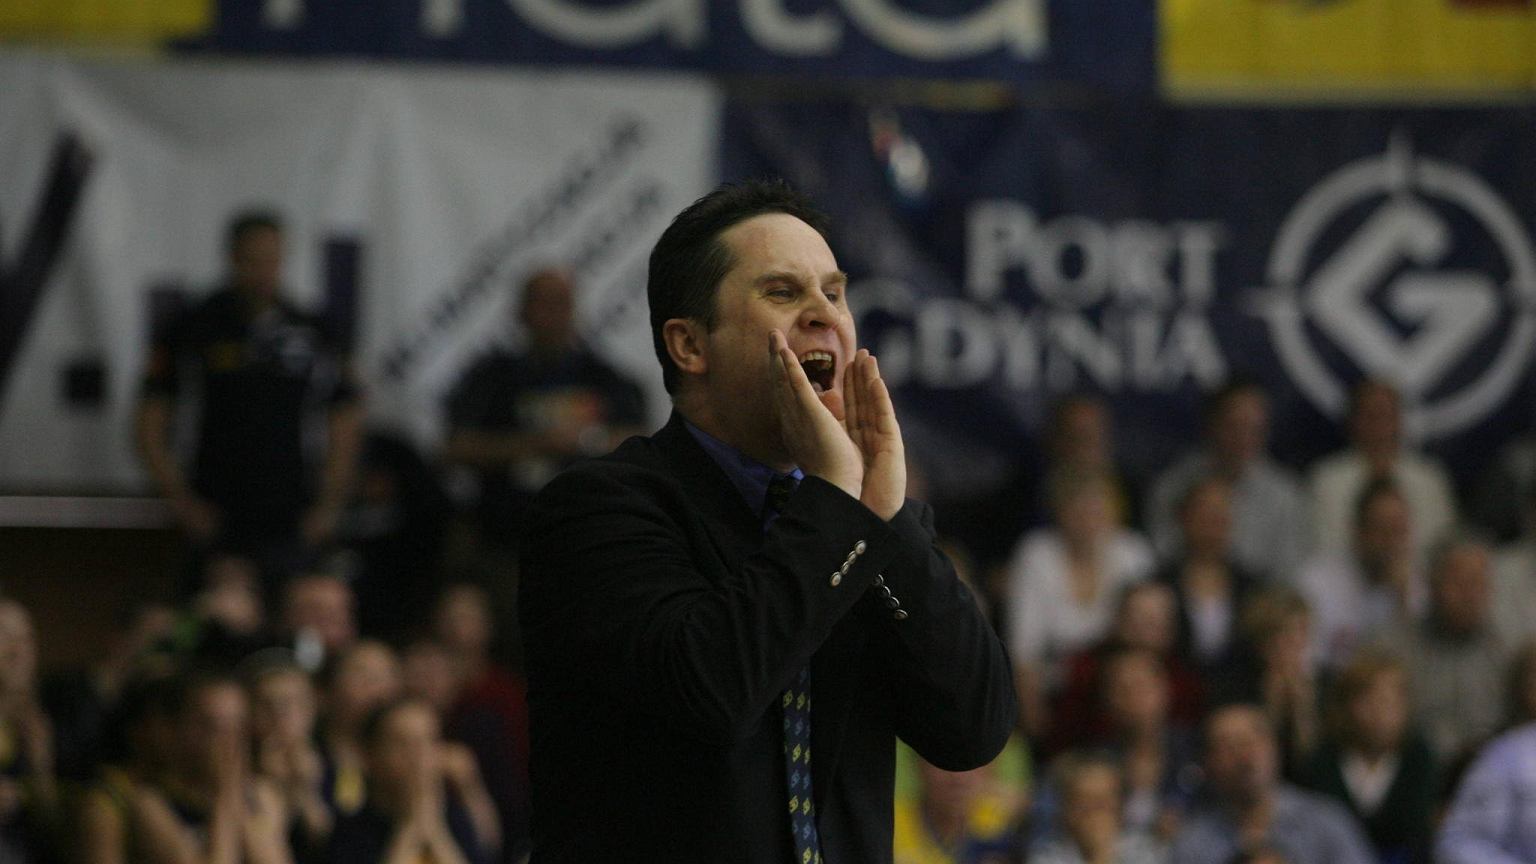 There is a decision regarding coach Roman Cherzic.  The effect of players' shocking confessions